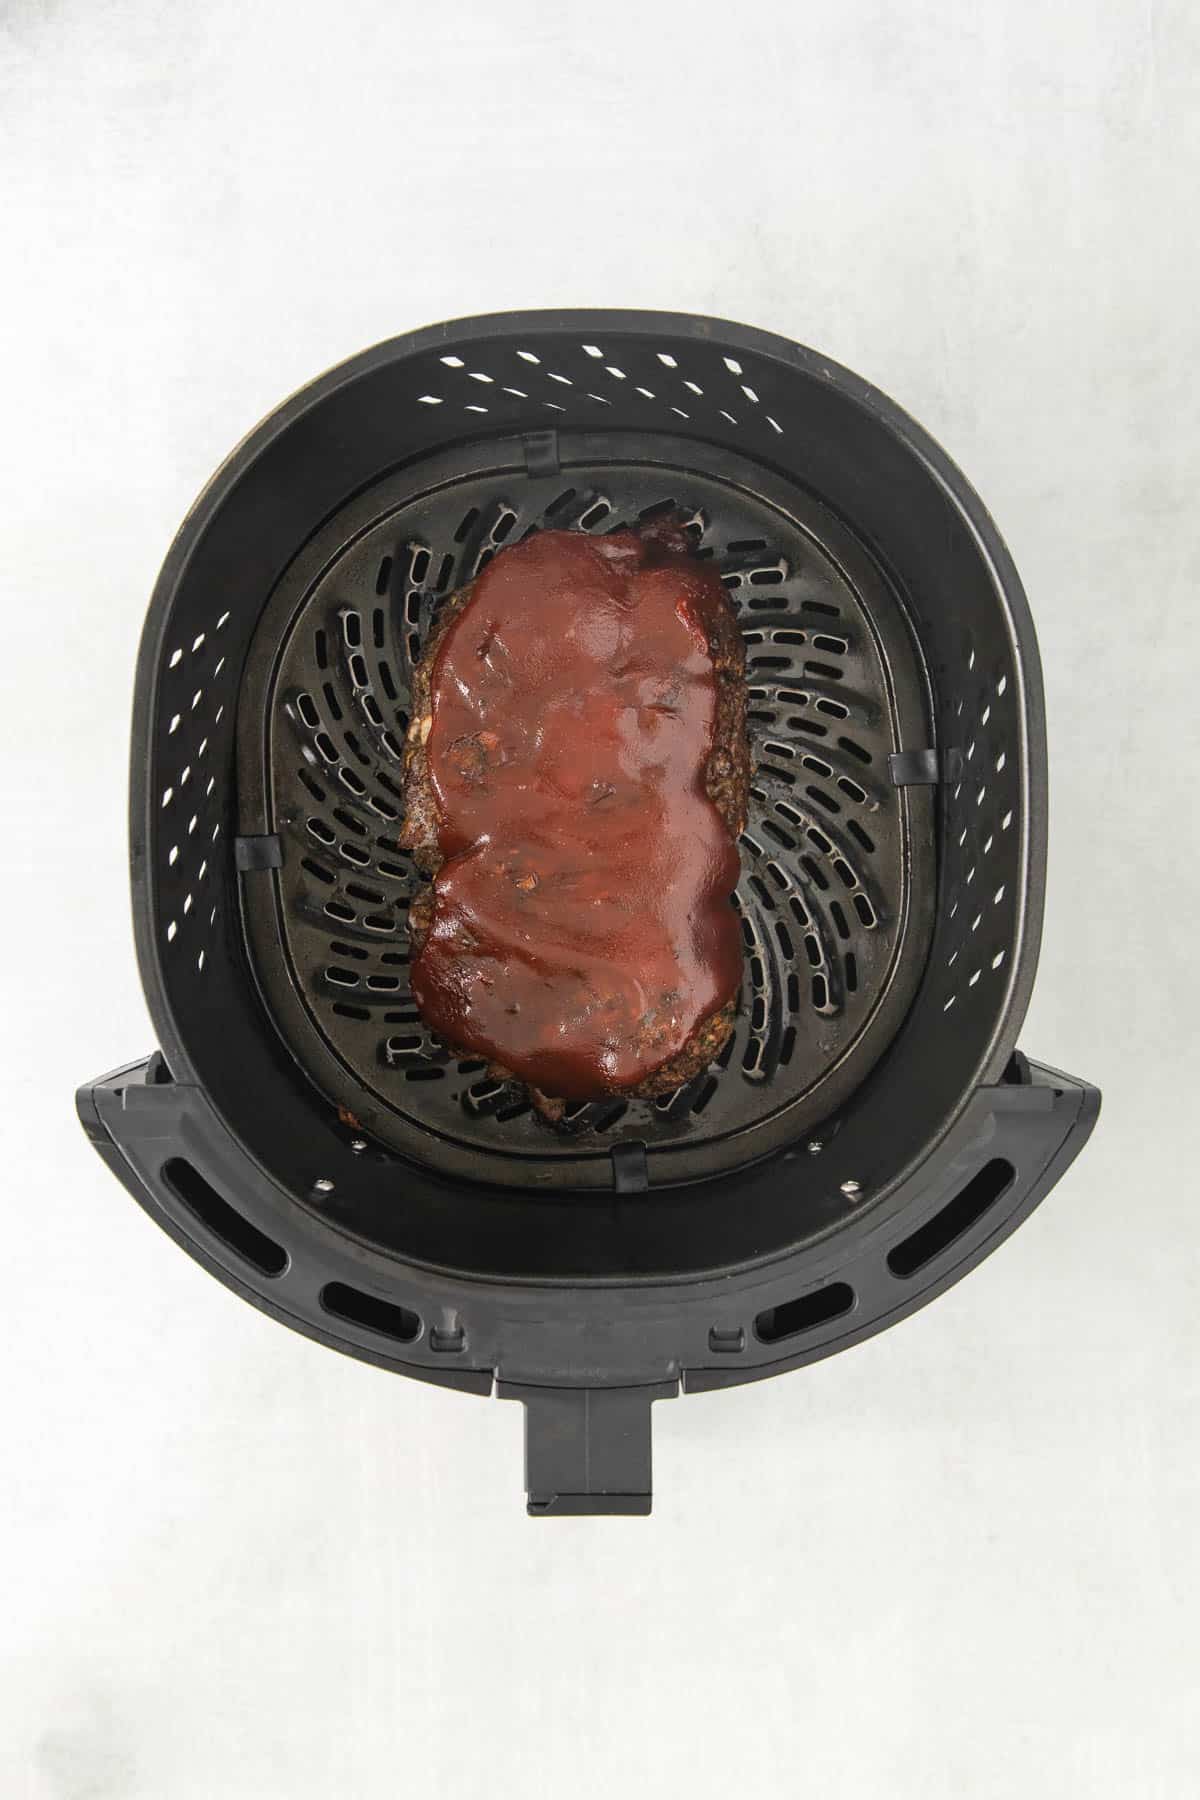 A meatloaf with sauce on top in an Air Fryer basket.